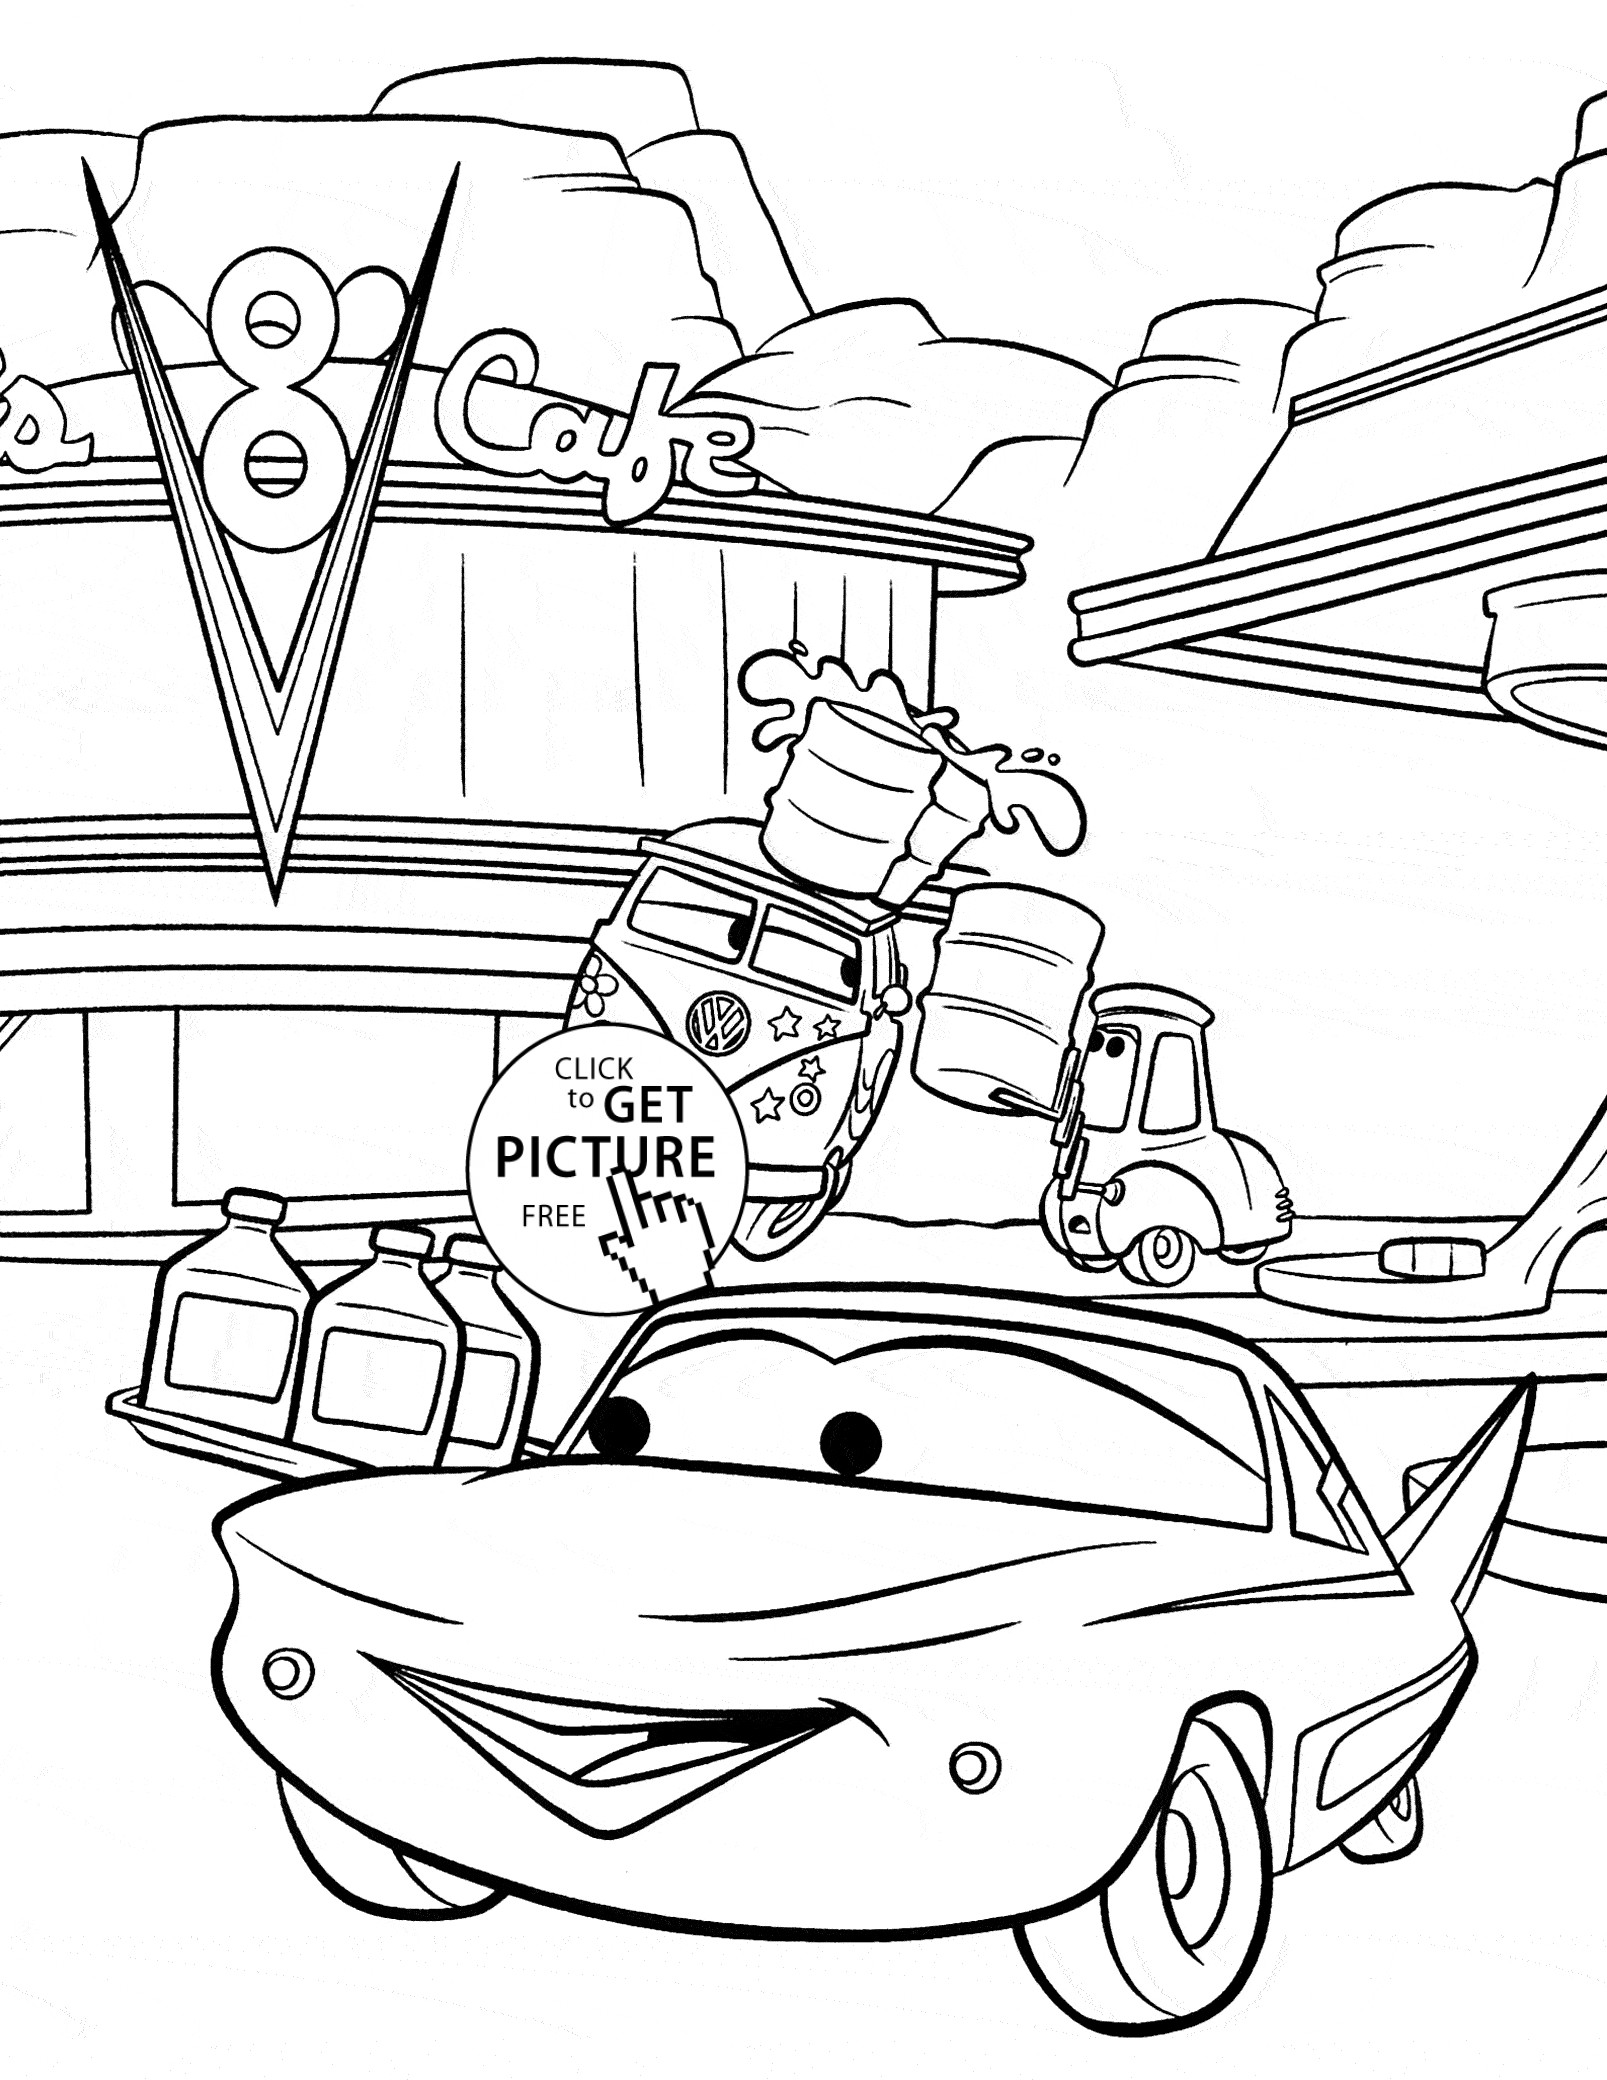 Car Coloring Sheets For Boys
 Disney Coloring Pages For Boys Cars – Color Bros